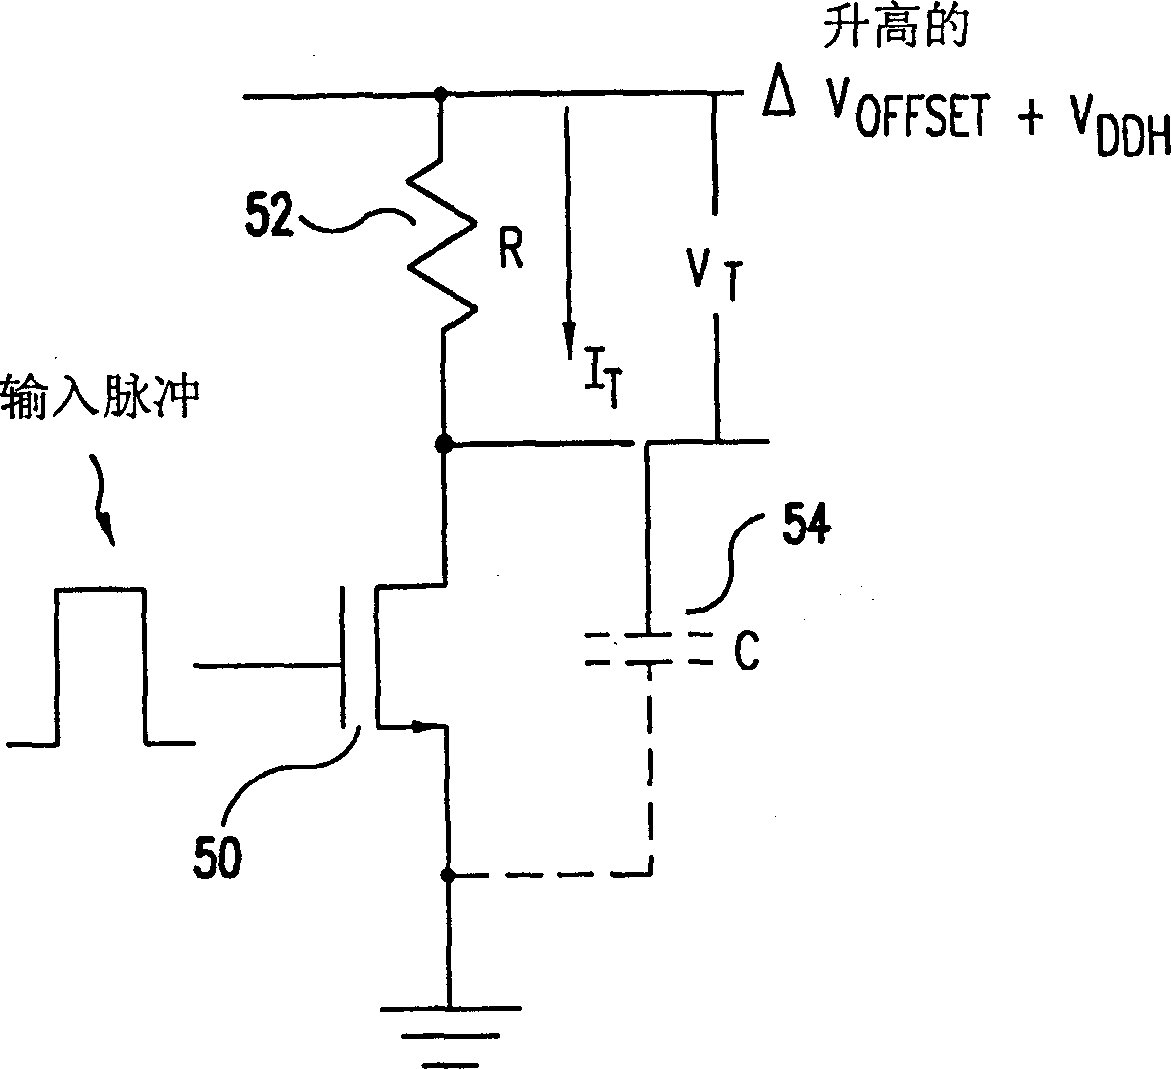 Digital level shifter with reduced power dissipation and false transmission blocking